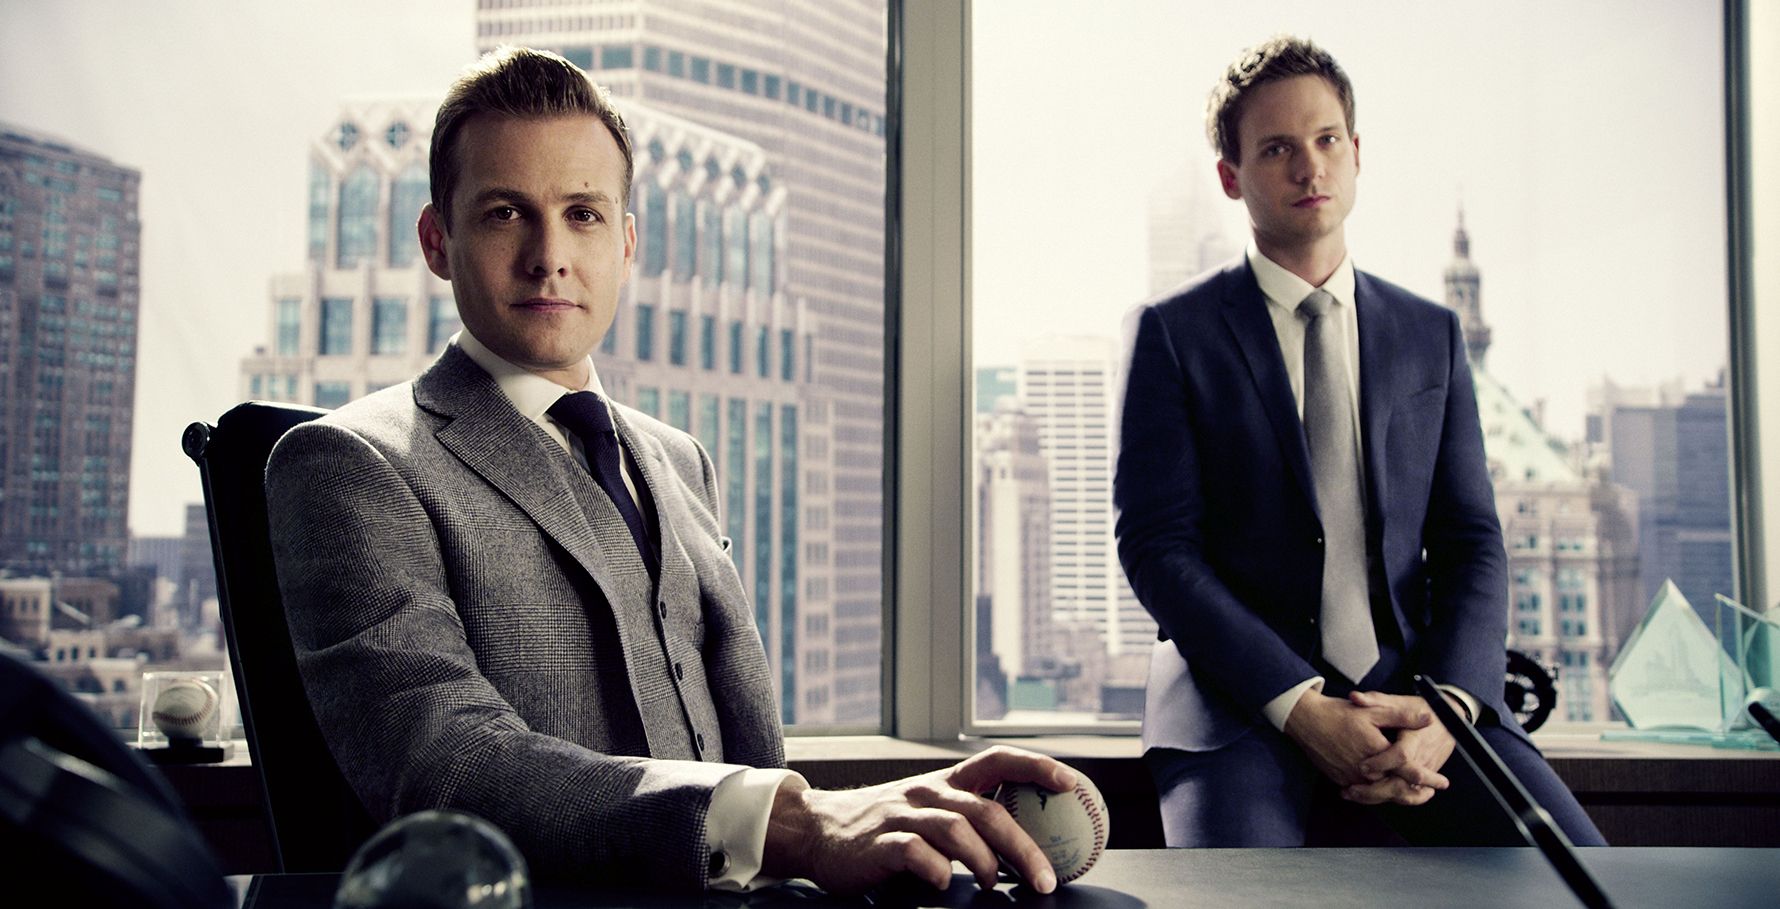 New 'Suits' Series From Aaron Korsh in Early Development